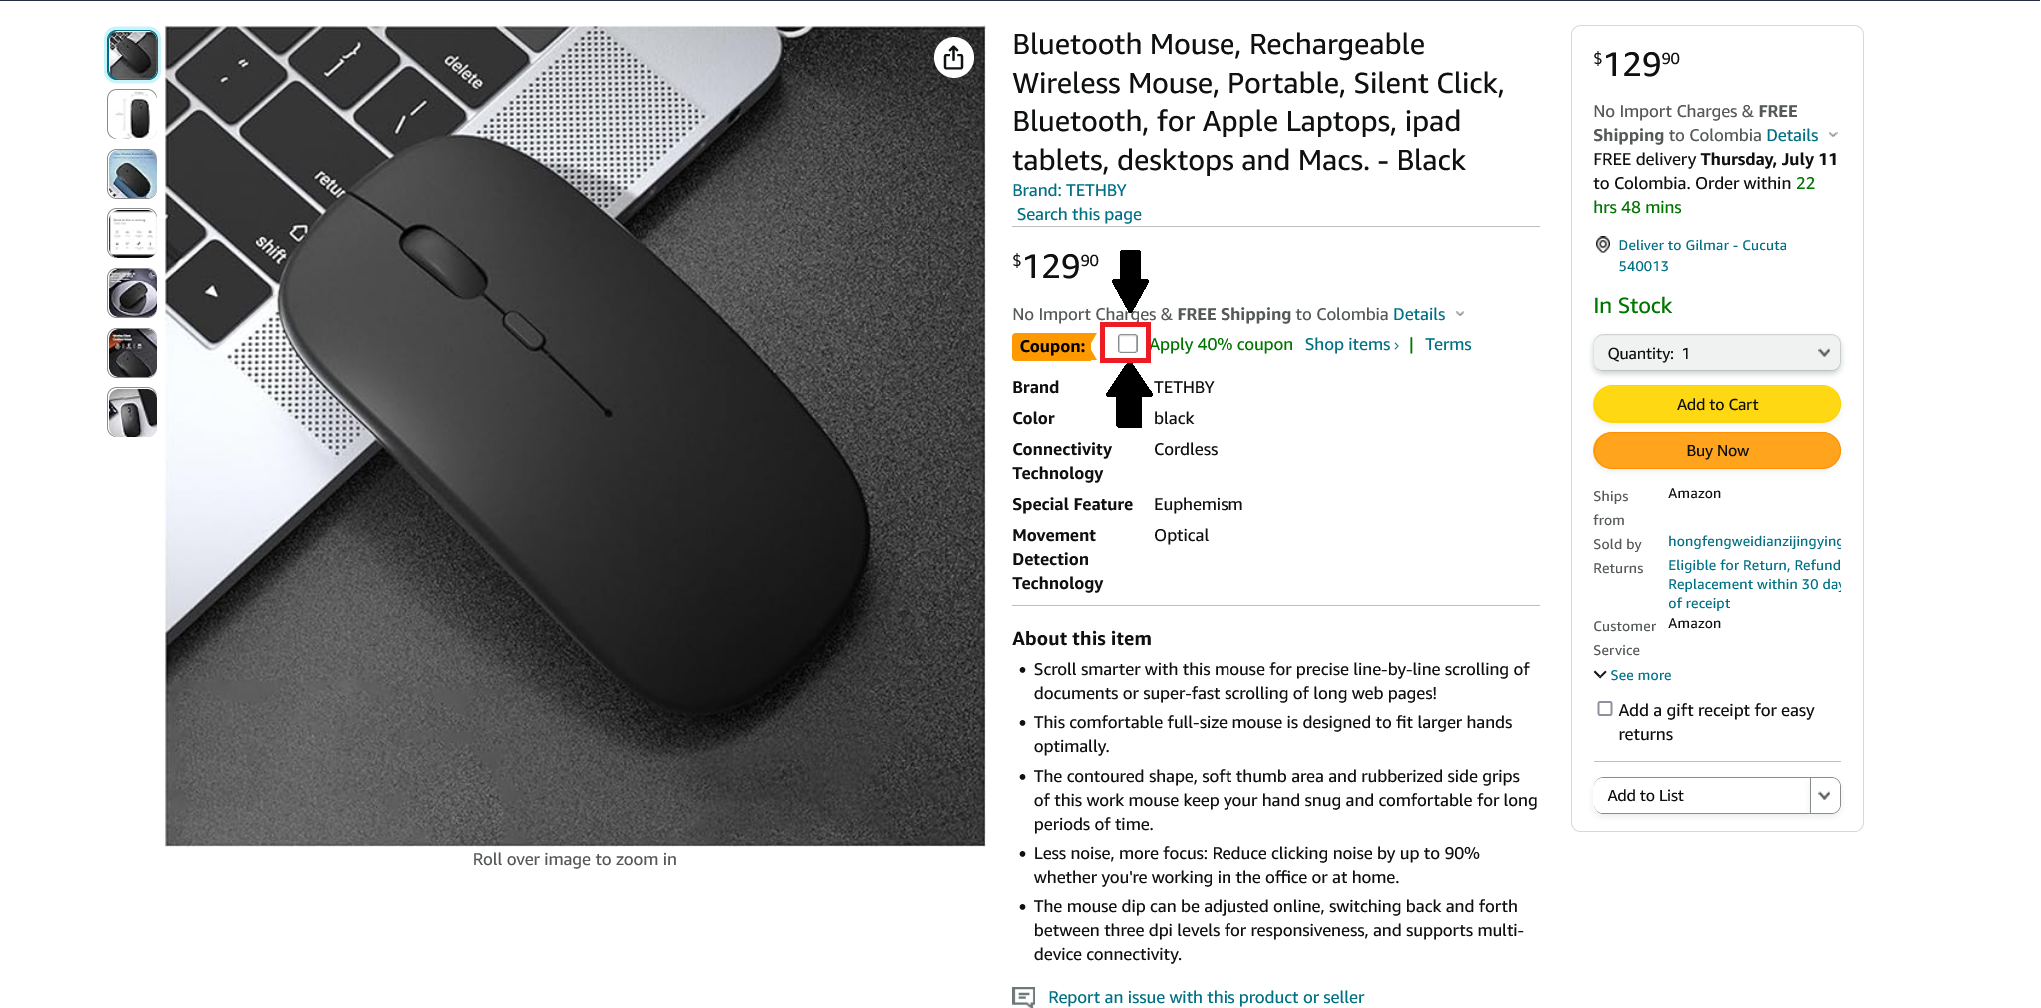 Screenshot 2024-07-02 at 00-58-10 Amazon.com TETHBY Bluetooth Mouse Rechargeable Wireless Mous...png